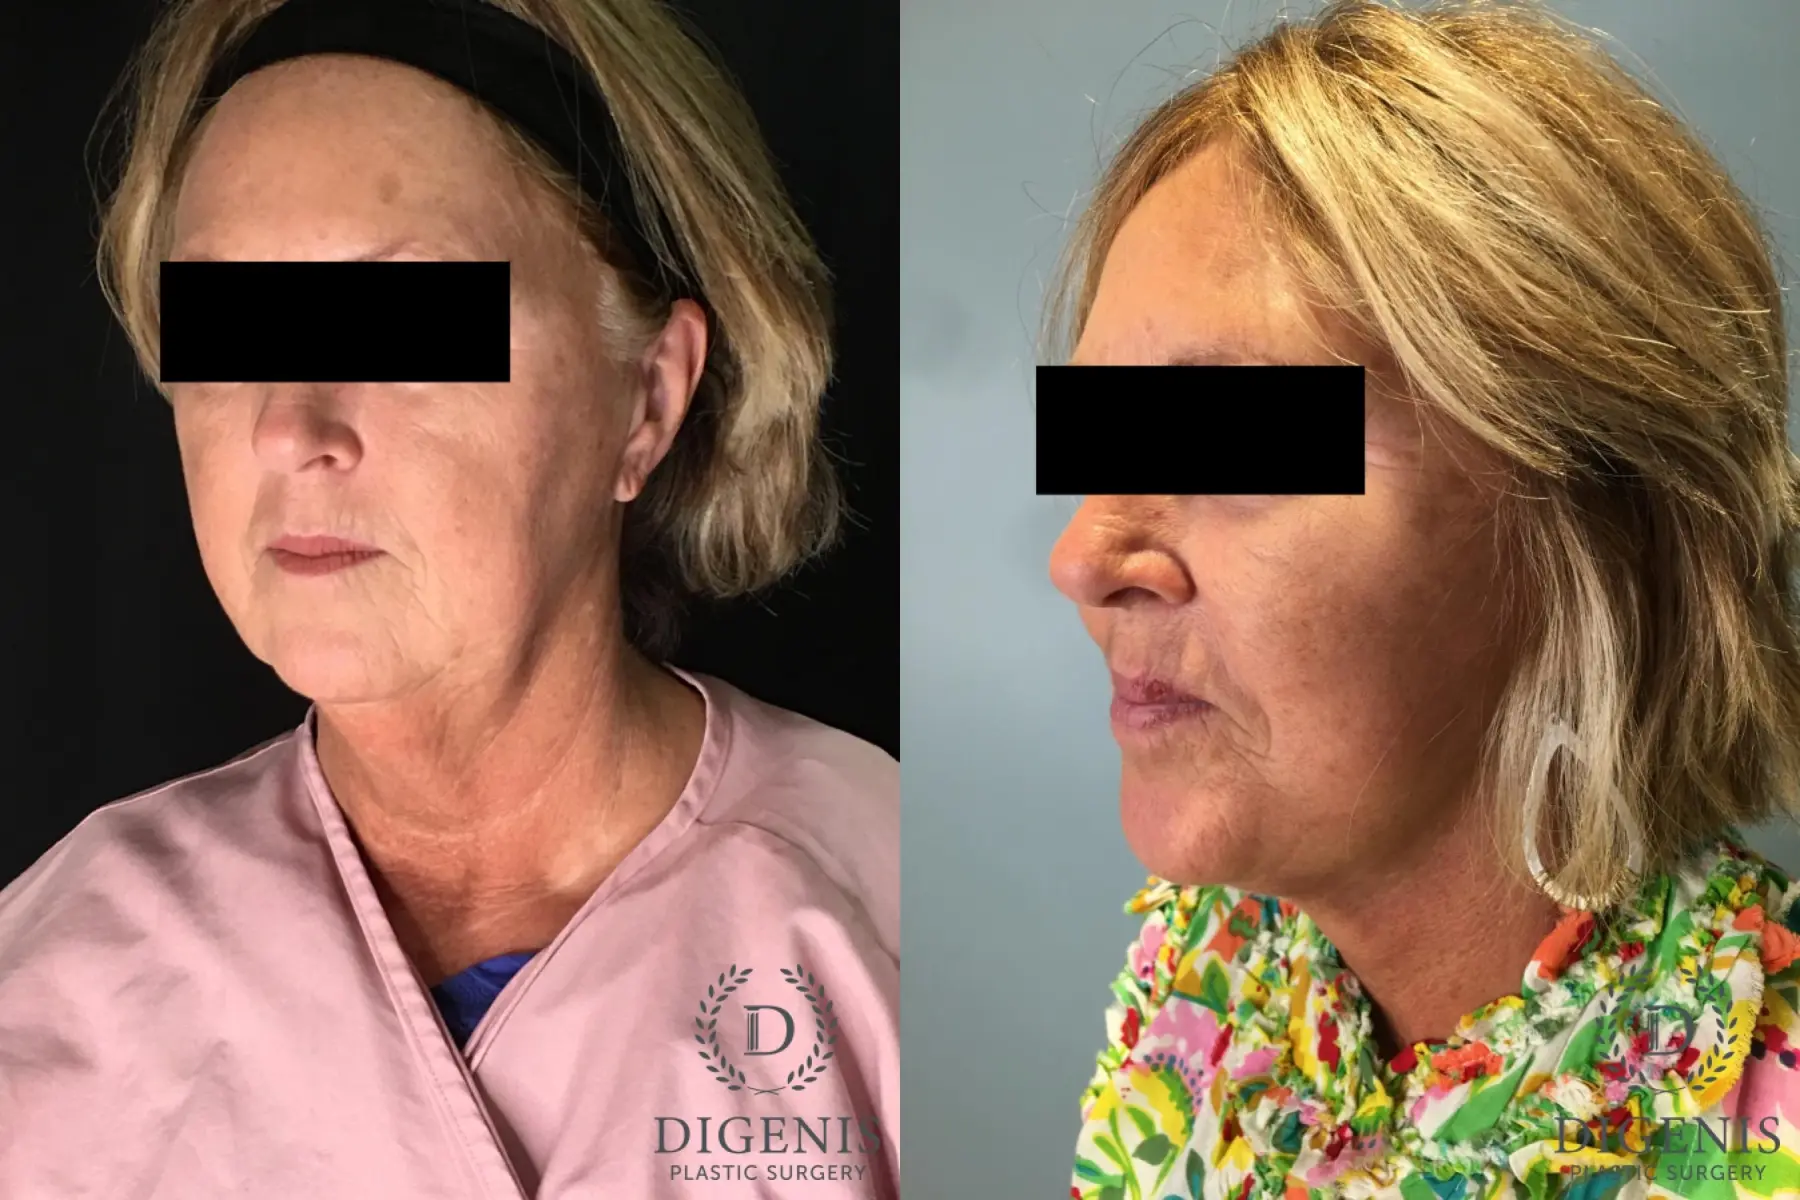 Facelift: Patient 27 - Before and After 4